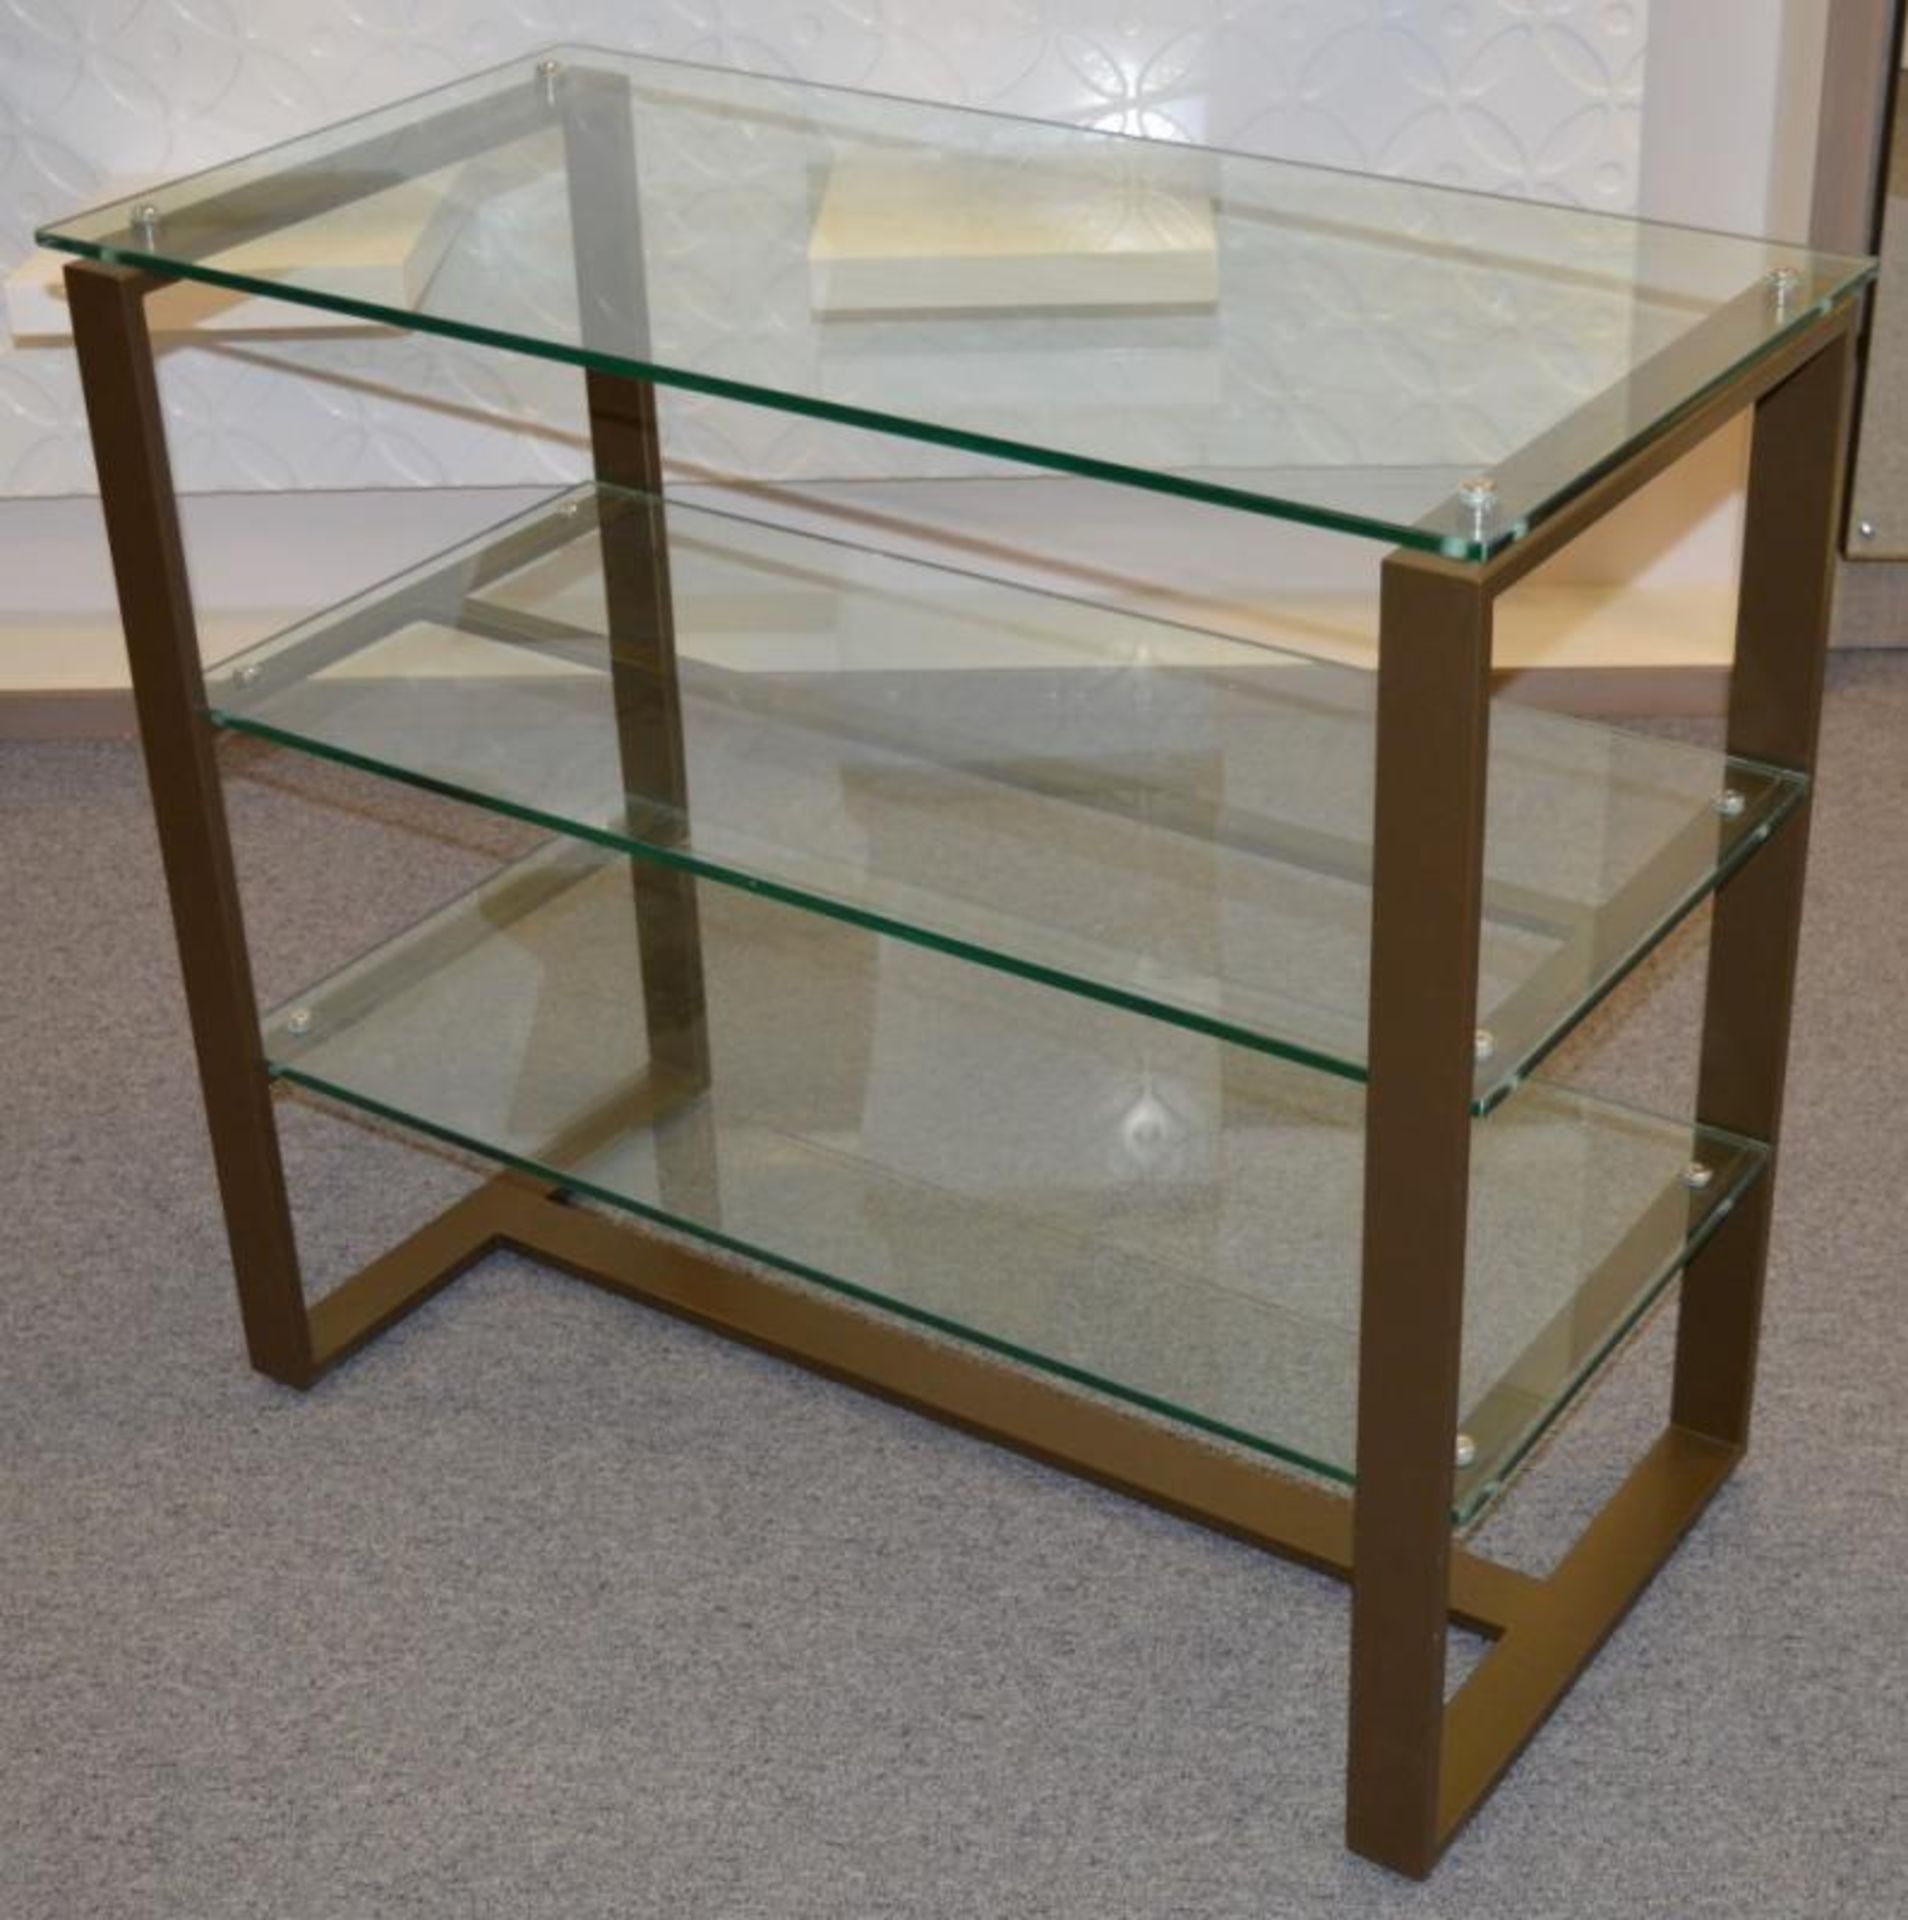 2 x Contemporary 3-Tier Glass Retail Display Shelving Units - Taken From A Well-Known Shoe Store